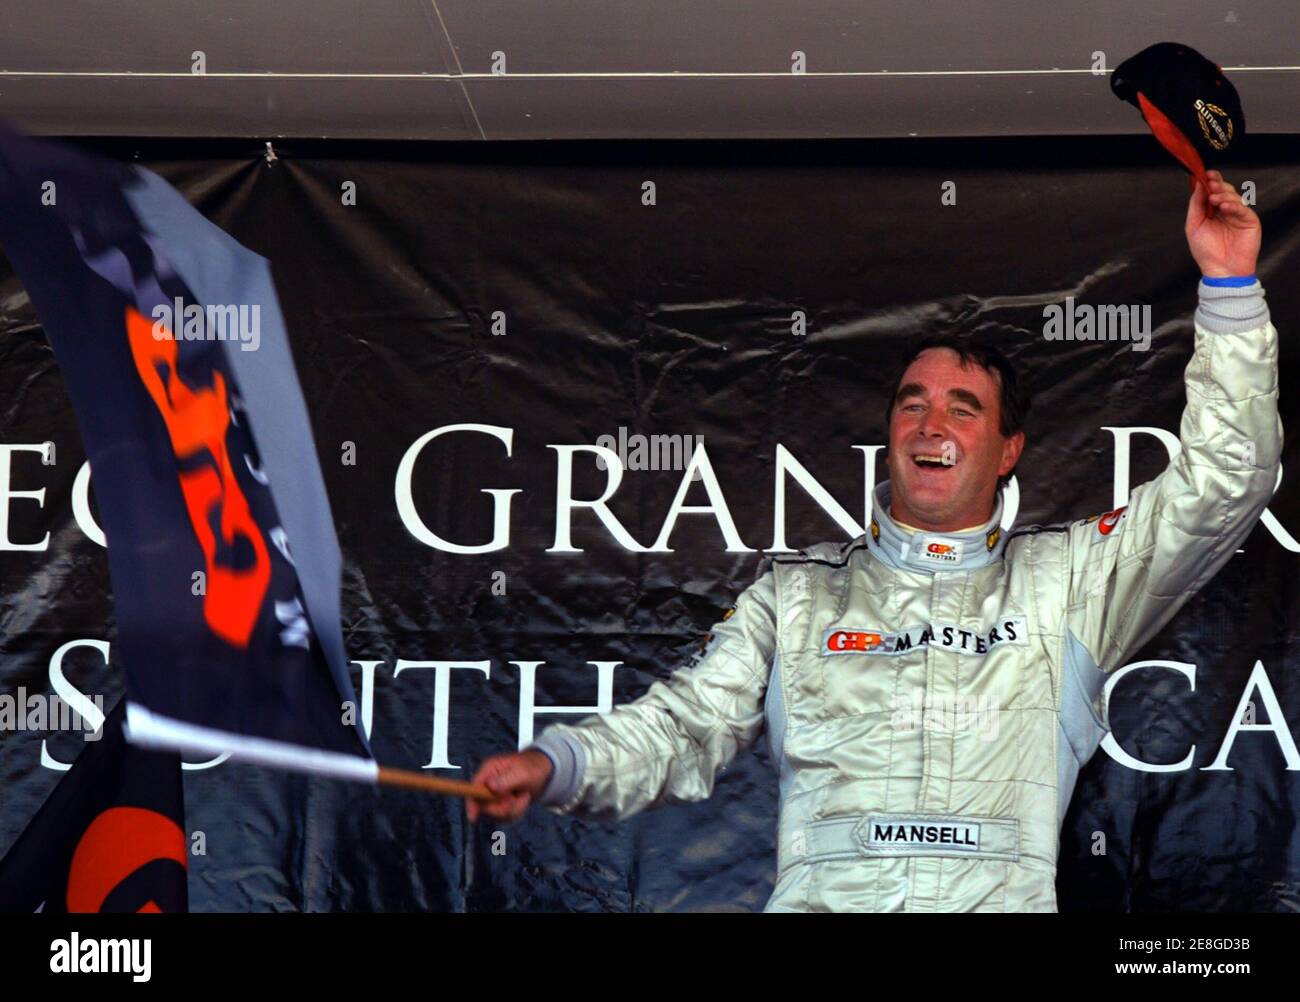 Briton Nigel Mansell celebrates after winning the Grand Prix Masters race at the Kyalami circuit near Johannesburg November 13, 2005. Mansell, 52, led the 30-lap race from start to finish and held off the challenge of Brazil's Emerson Fittipaldi to win by less than half-a-second. REUTERS/Juda Ngwenya Stock Photo